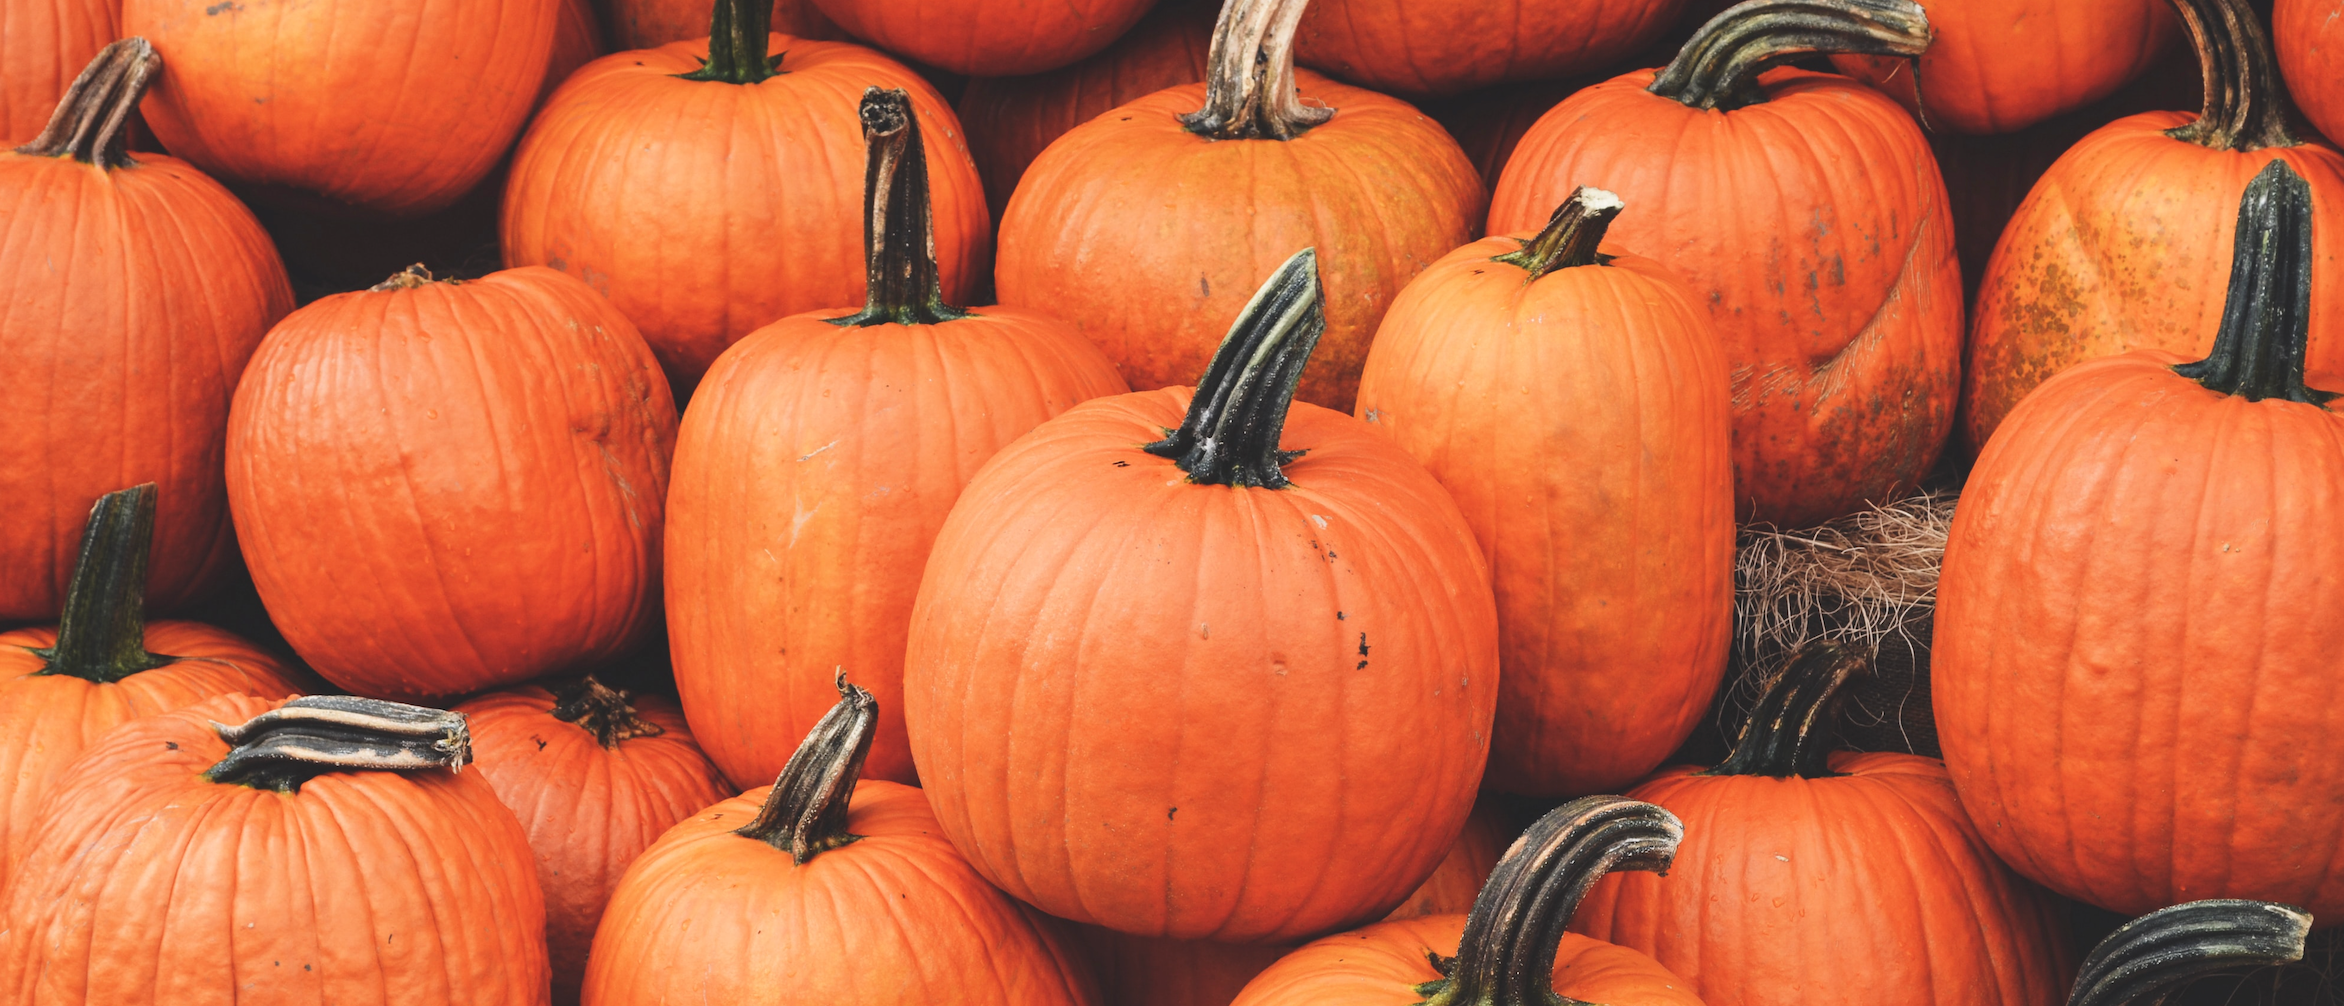 Pumpkin-Everything: Sweet and Savory Recipe Ideas for Fall’s Favorite Squash